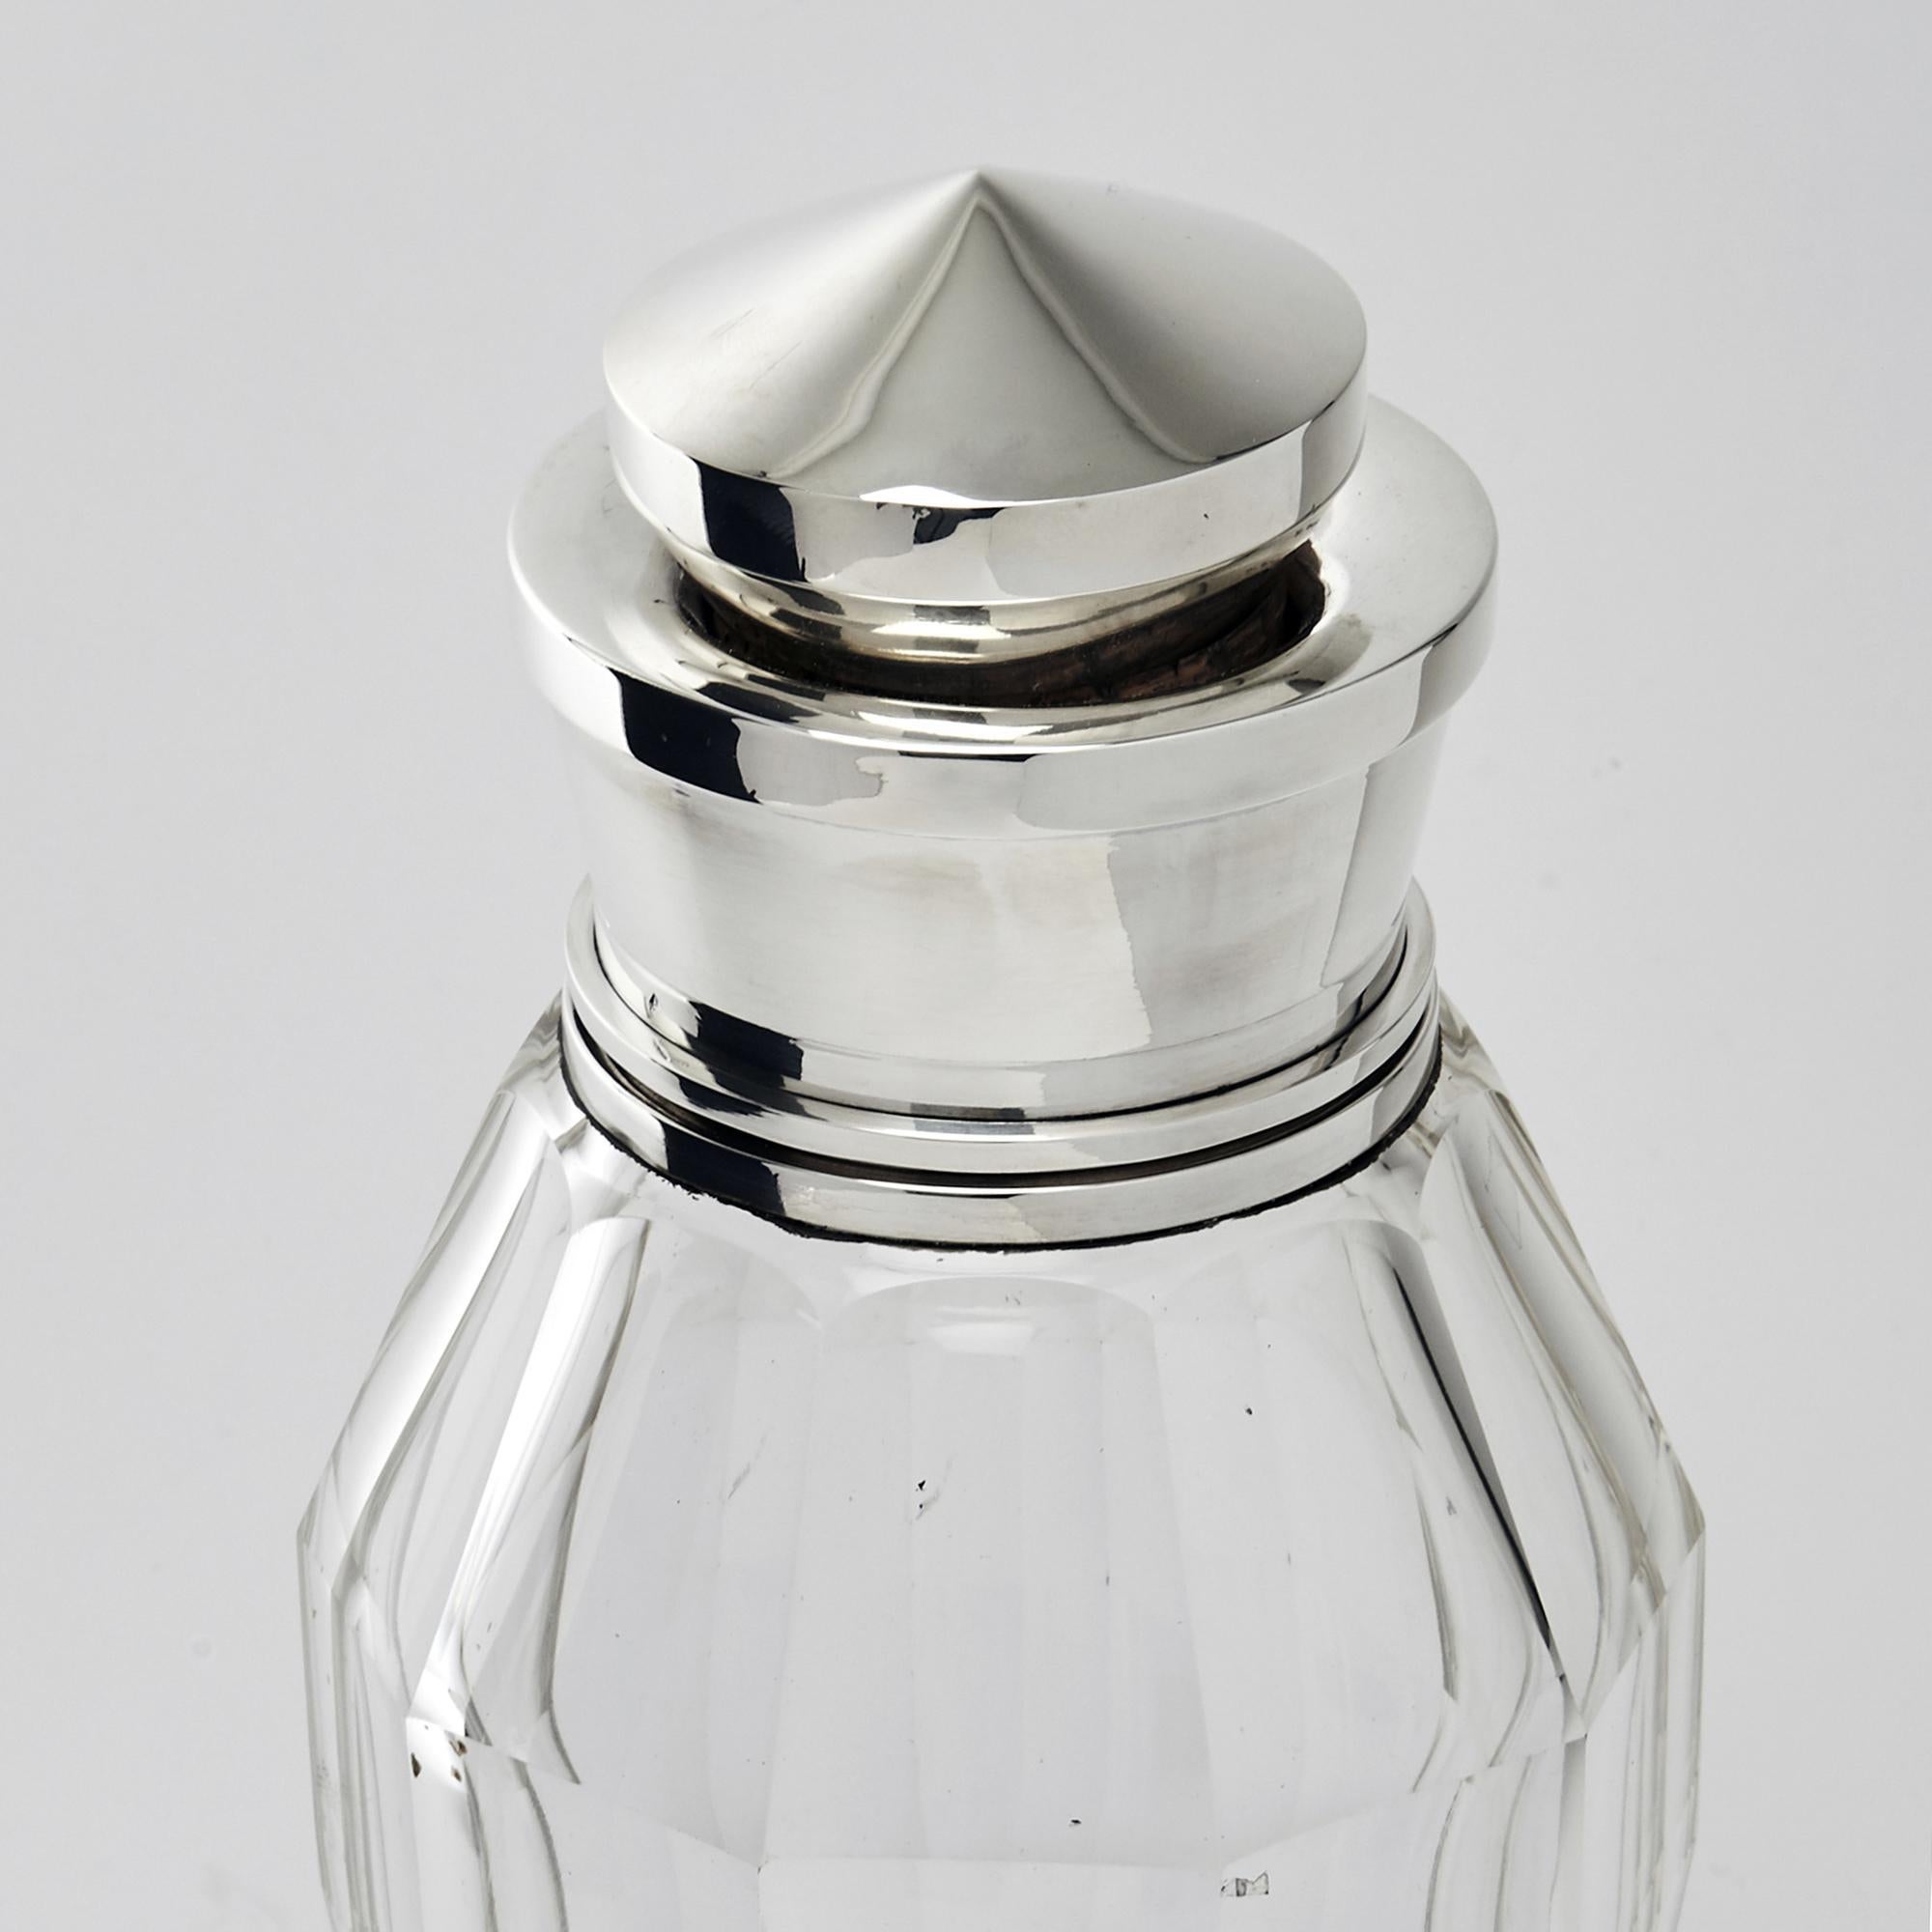 Highly stylized Art Deco style cocktail shaker in a design so reminiscent of the period. The body is handcut glass while the stopper and collar are sterling silver. This piece was made in France for the English market and bears London import